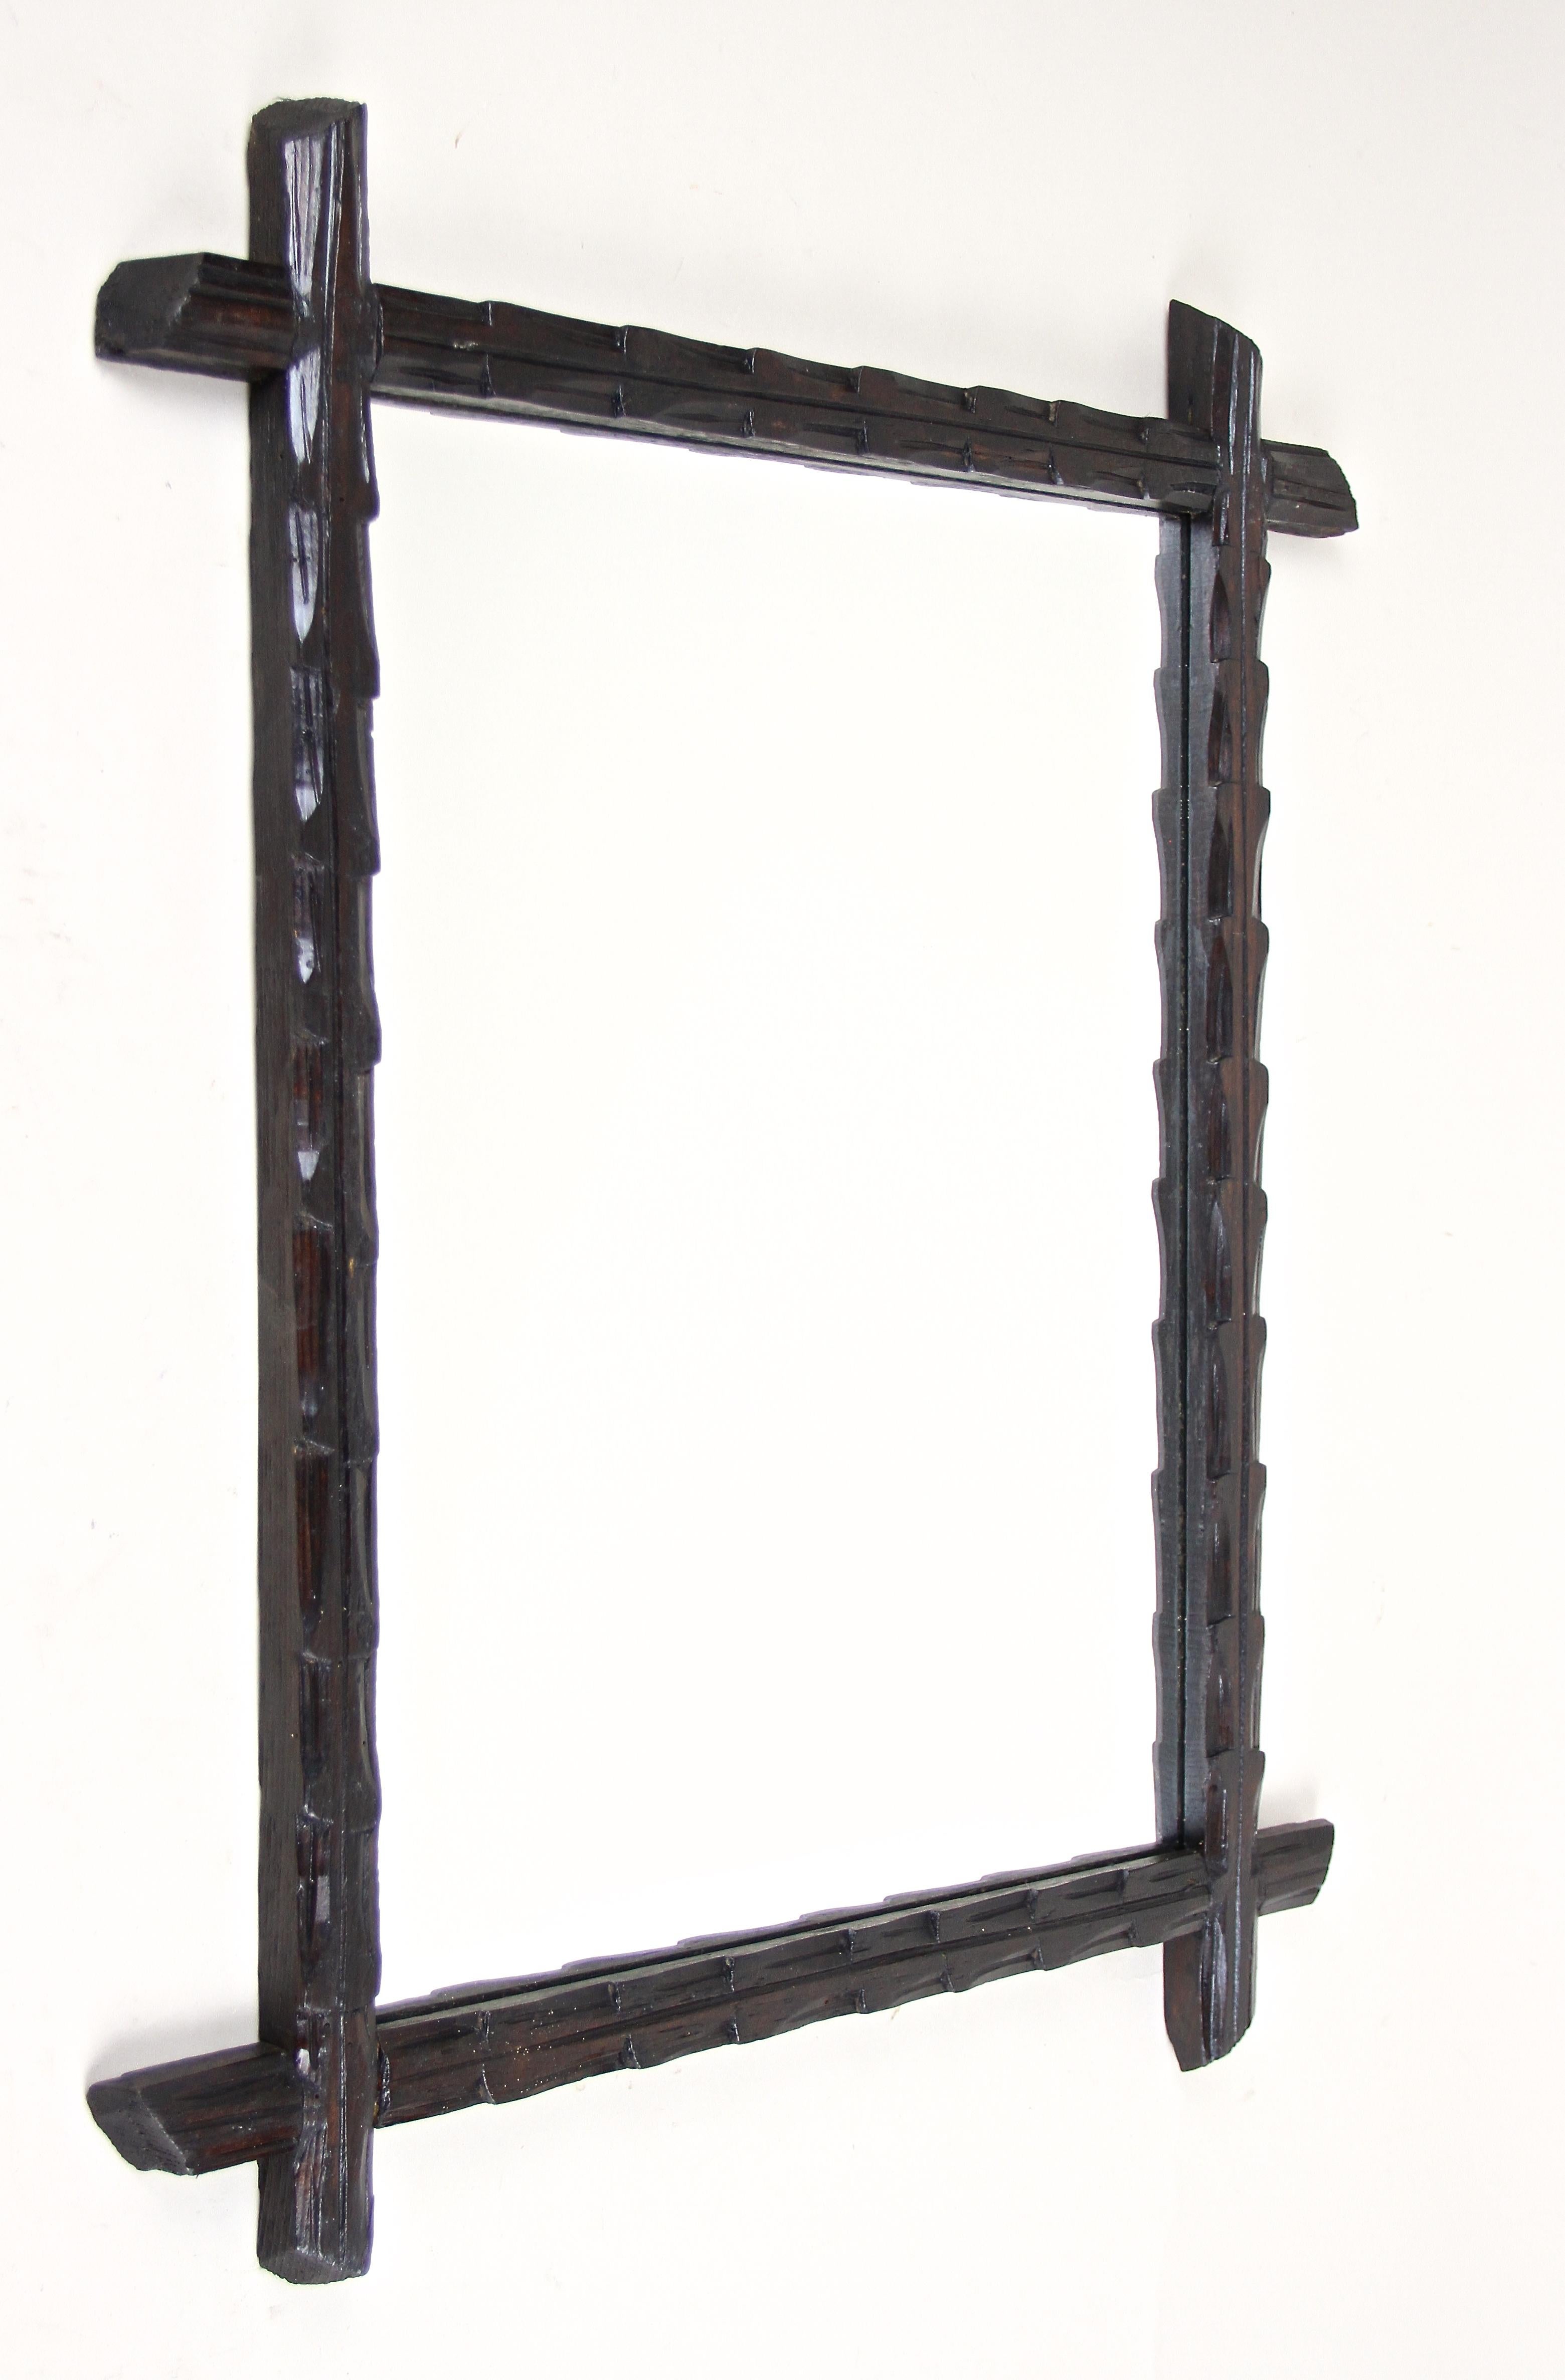 Uncommon rustic black forest wall mirror from Austria, around 1880. This antique wall mirror impresses with an unusual hand carved design, elaborately made out of basswood. A very dark brown almost black looking finish confers this great late 19th